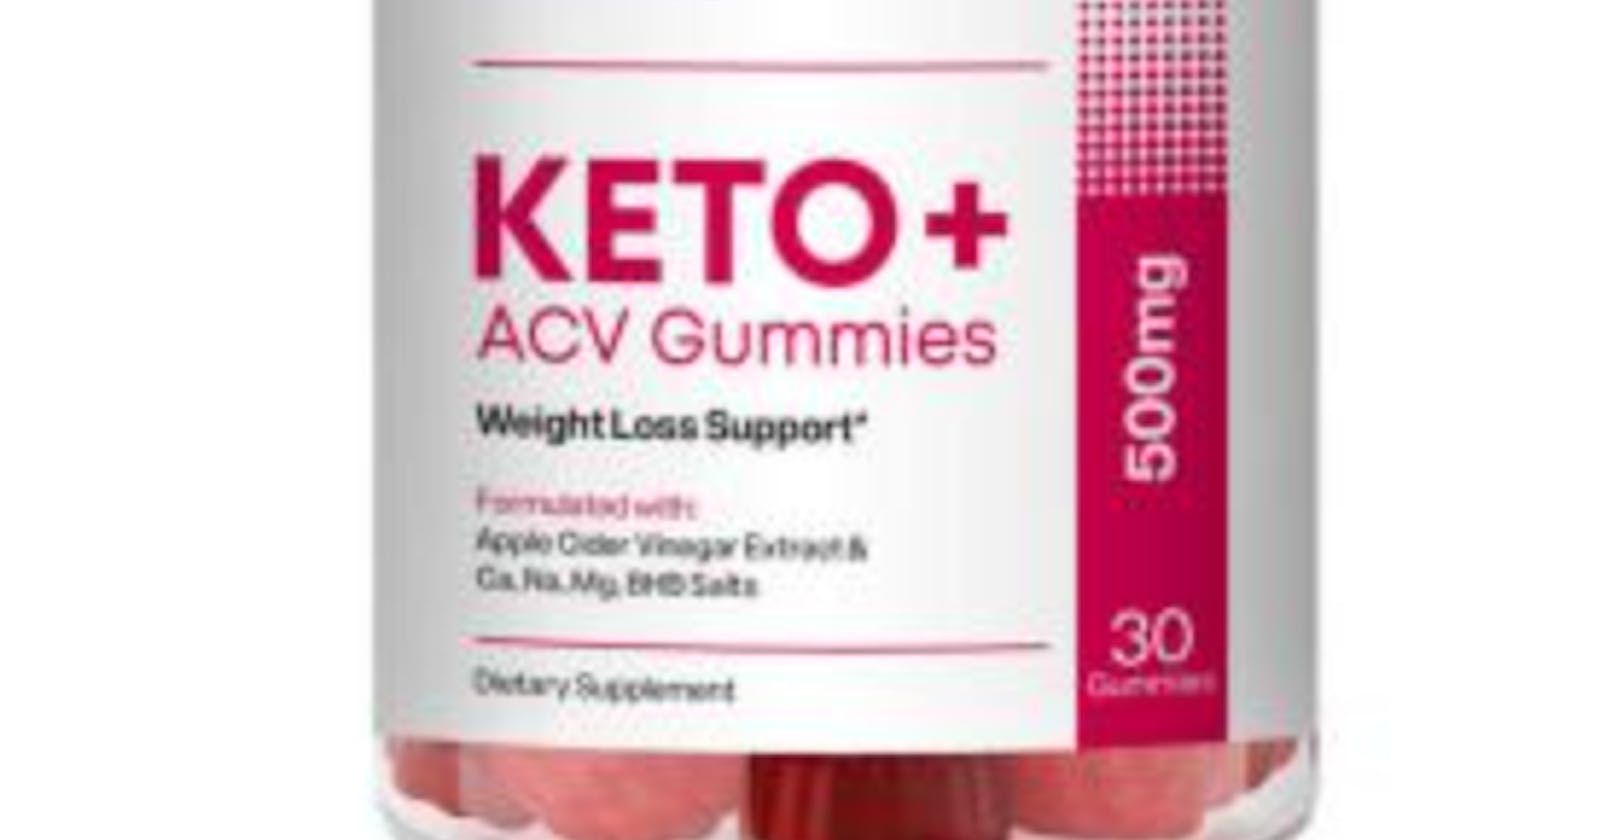 ReFit Keto ACV Gummies - Effective Product Good For You, Where To Buy!